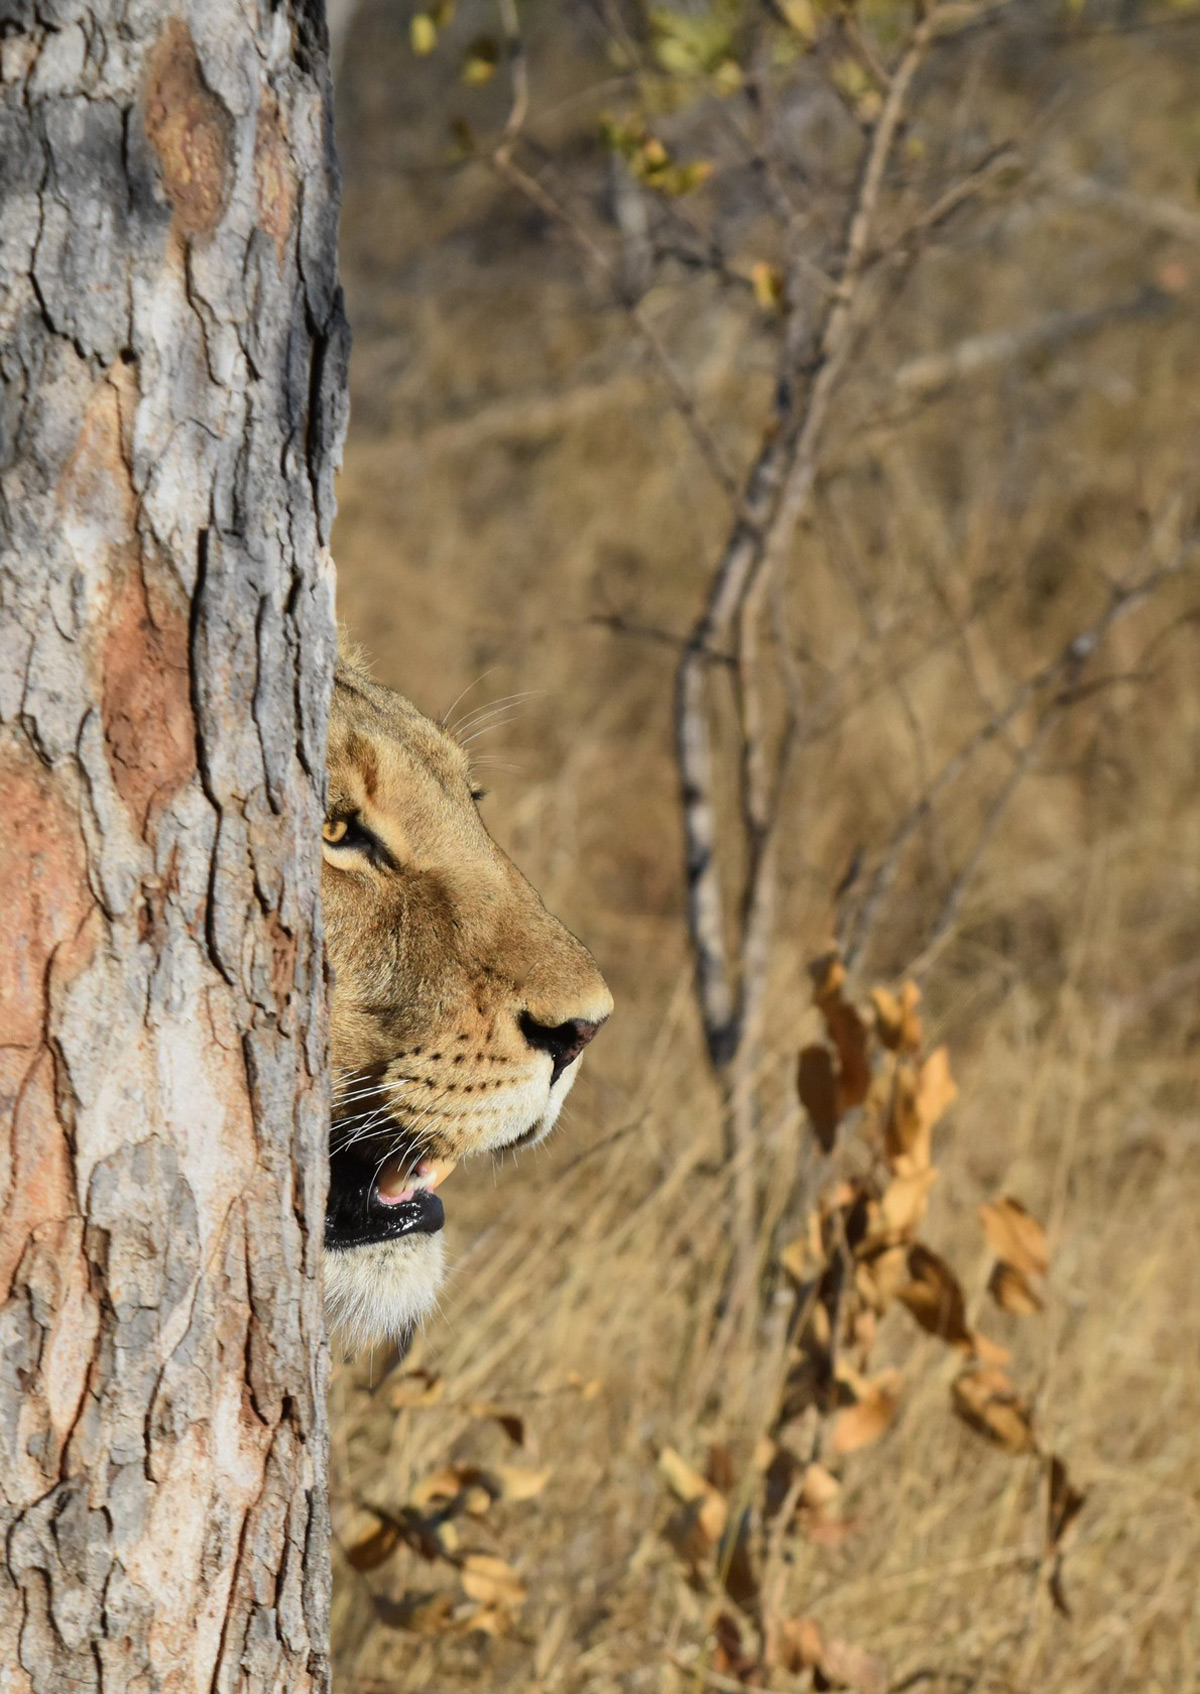 A lioness peers out from behind a tree in MalaMala Game Reserve, South Africa © Steve Pressman